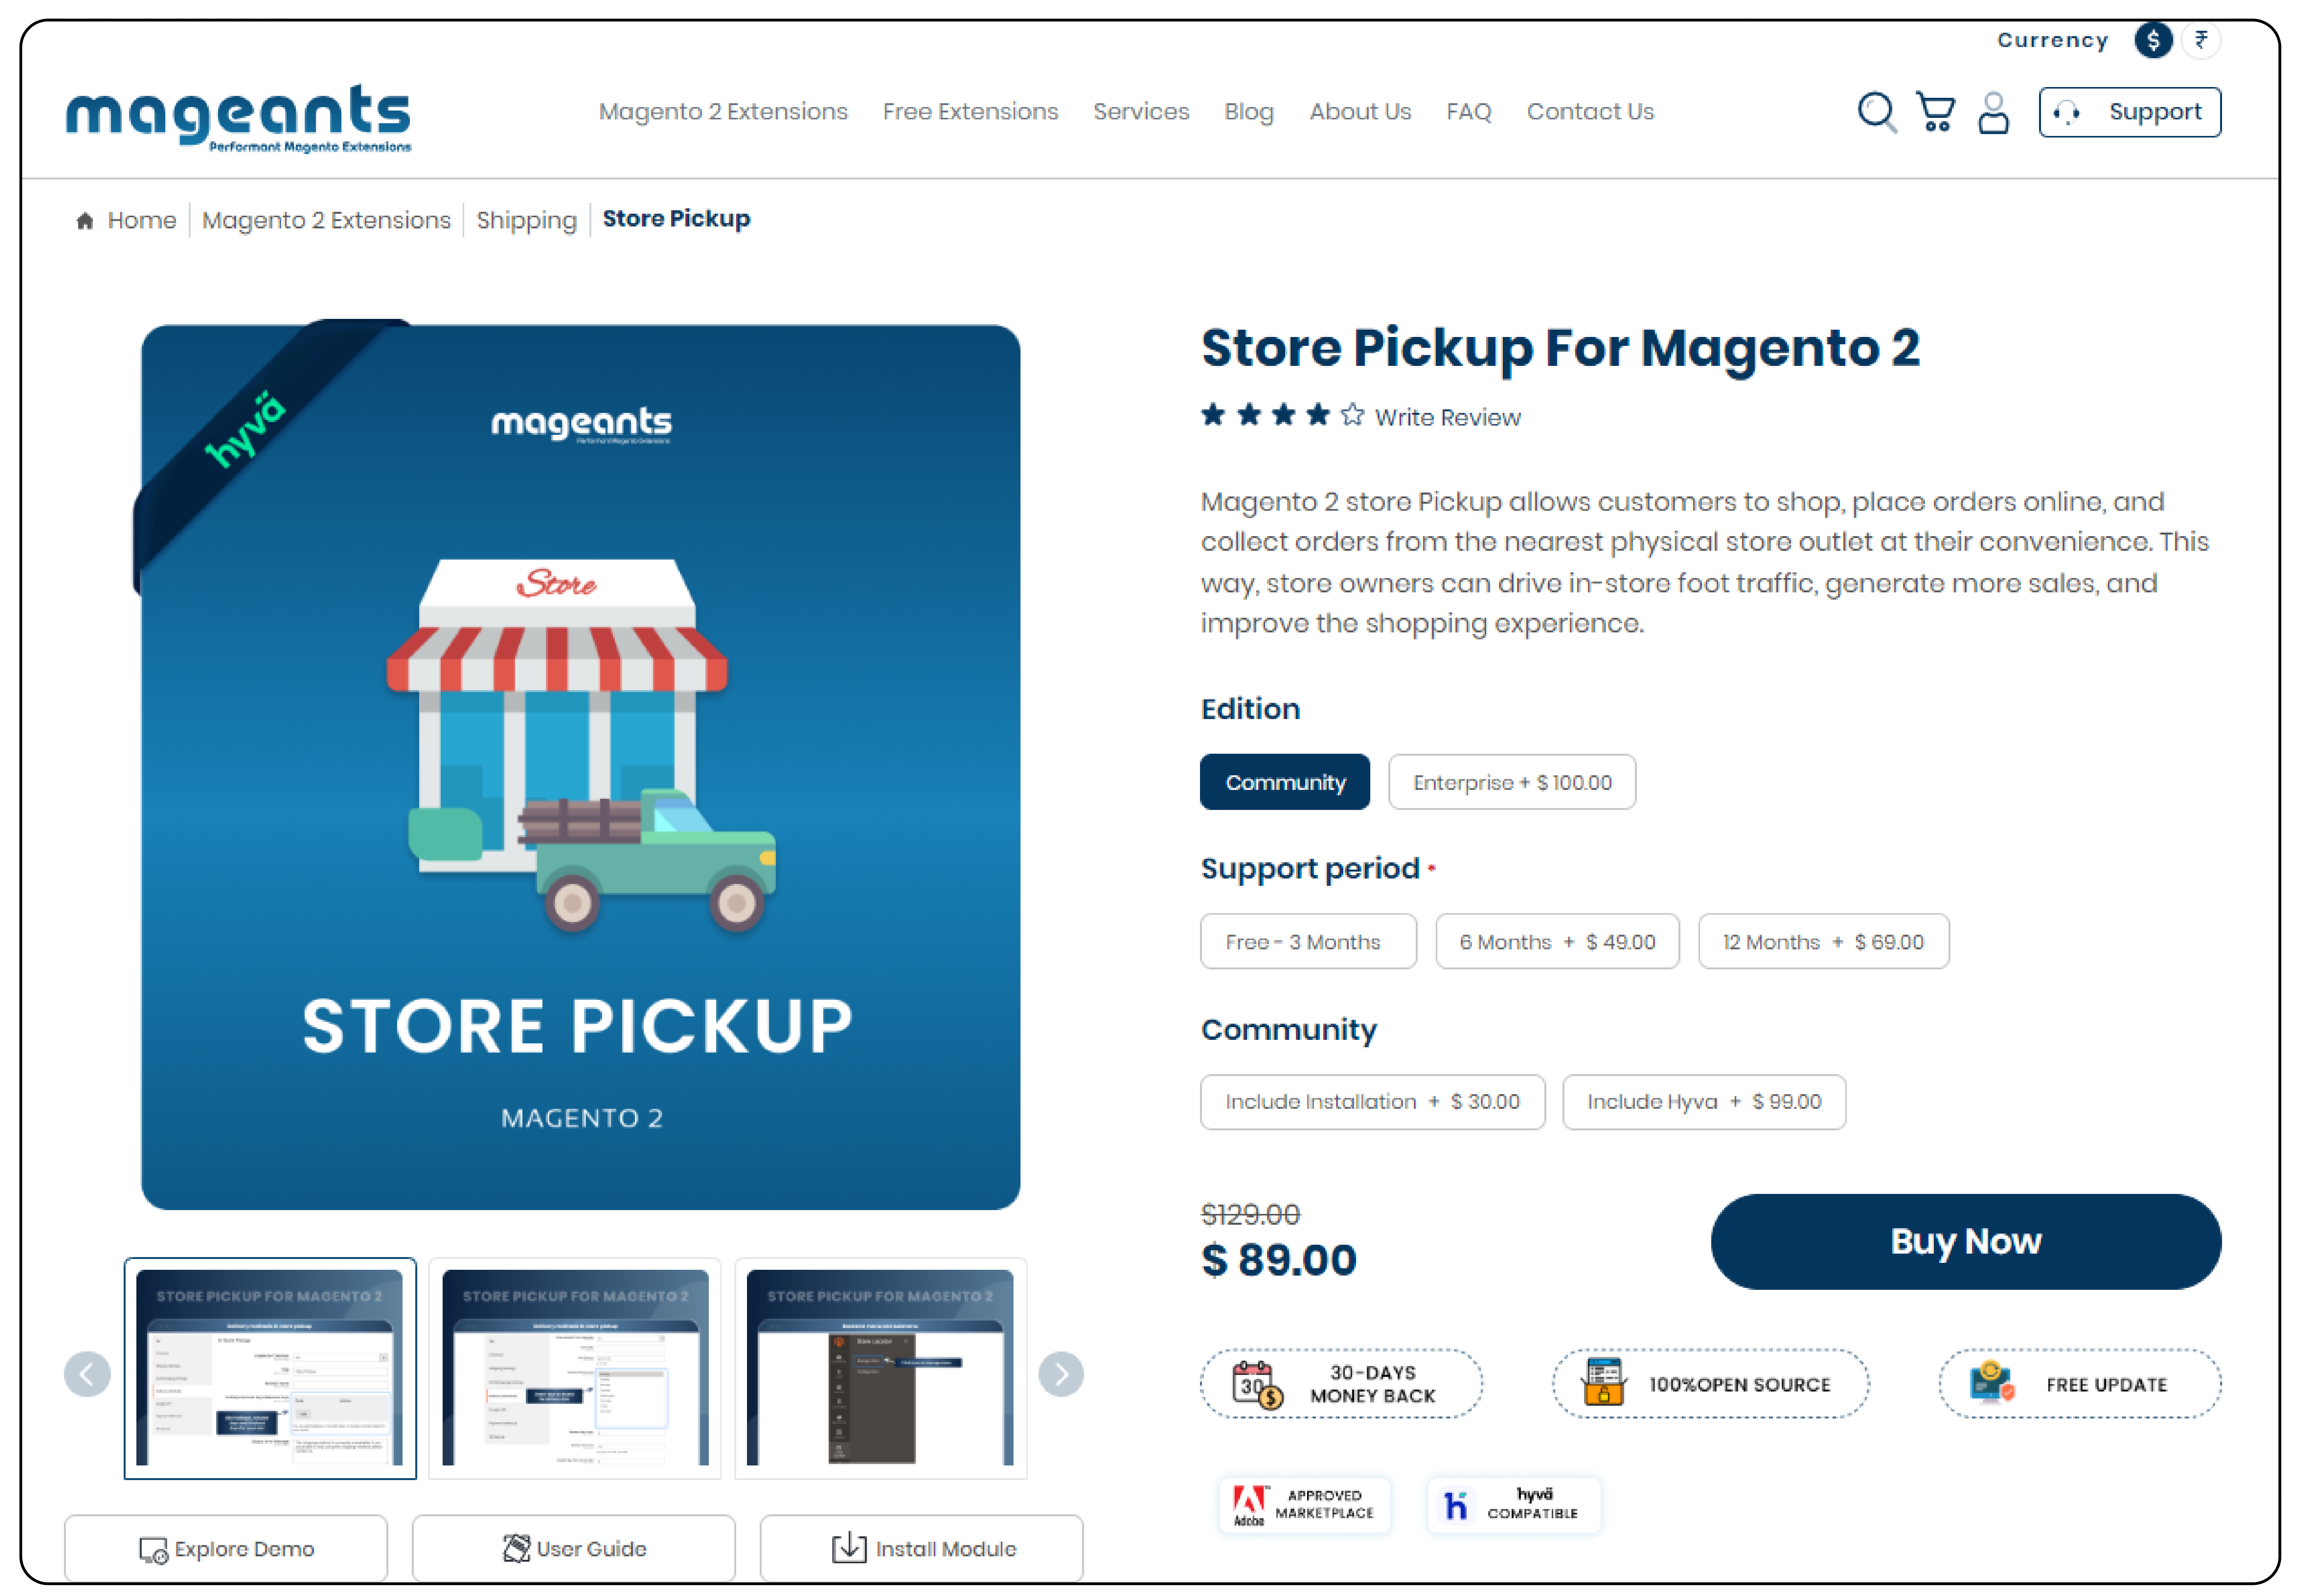 Store Pickup Extension for Magento 2 - Mageants